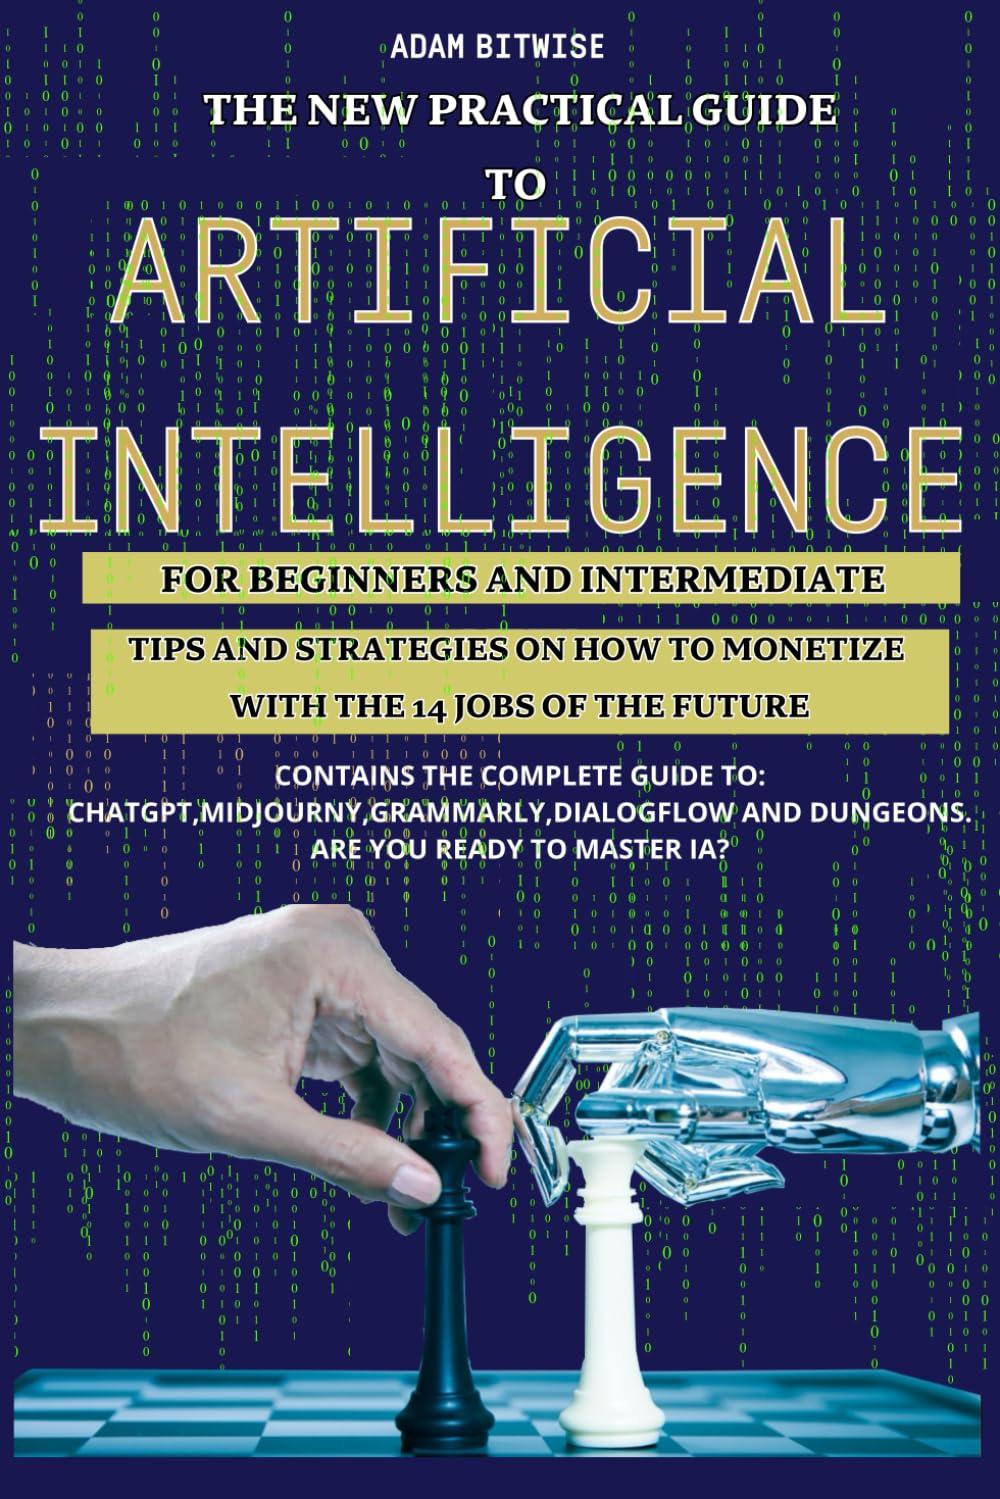 The New Pratical Guide To Artificial Intelligence For Beginners And Intermediate